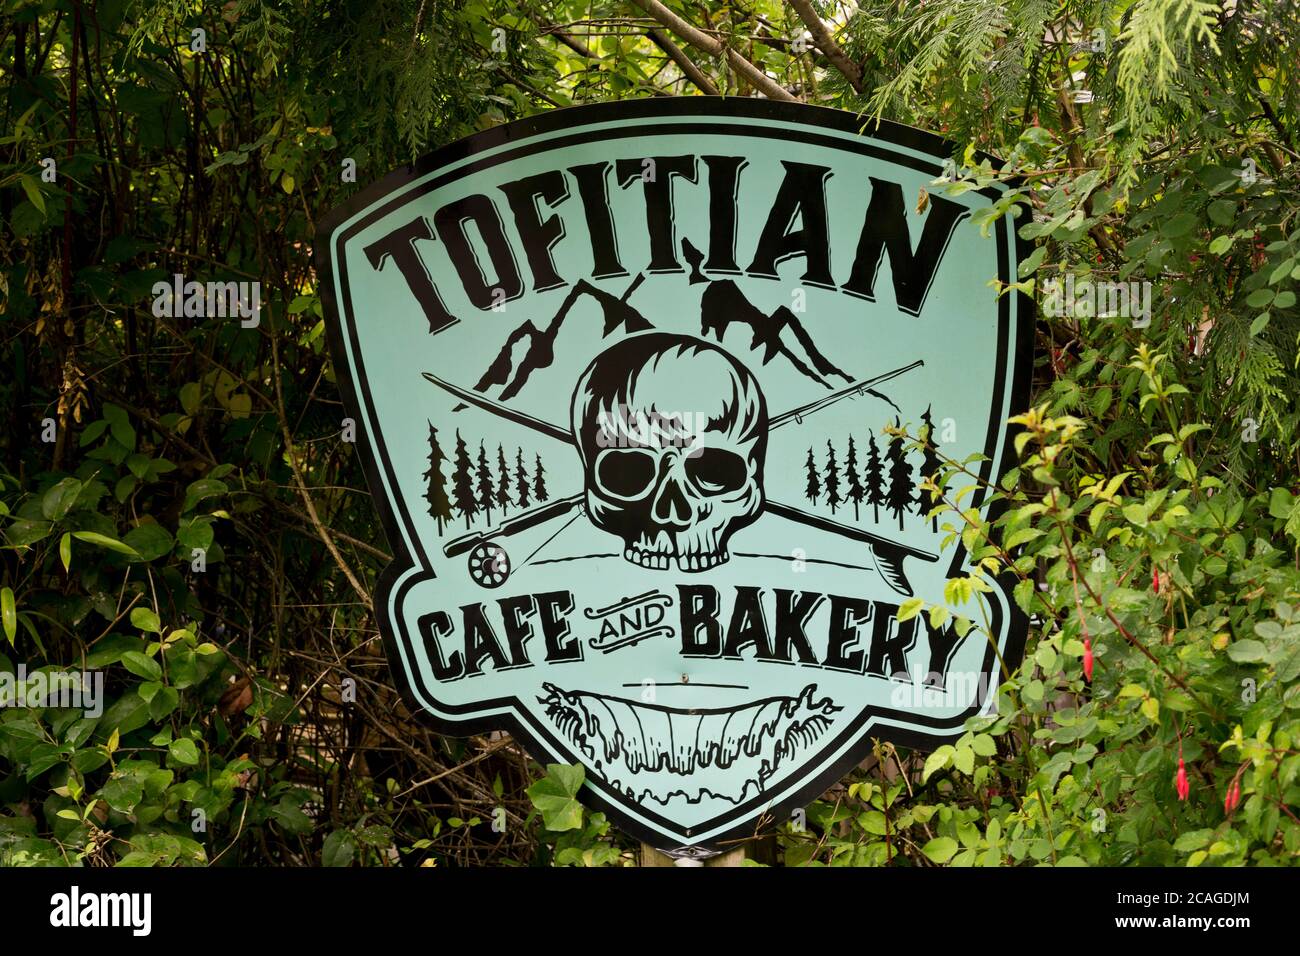 Sign for Tofitian Cafe and Bakery in Tofino, British Columbia, Canada Stock Photo